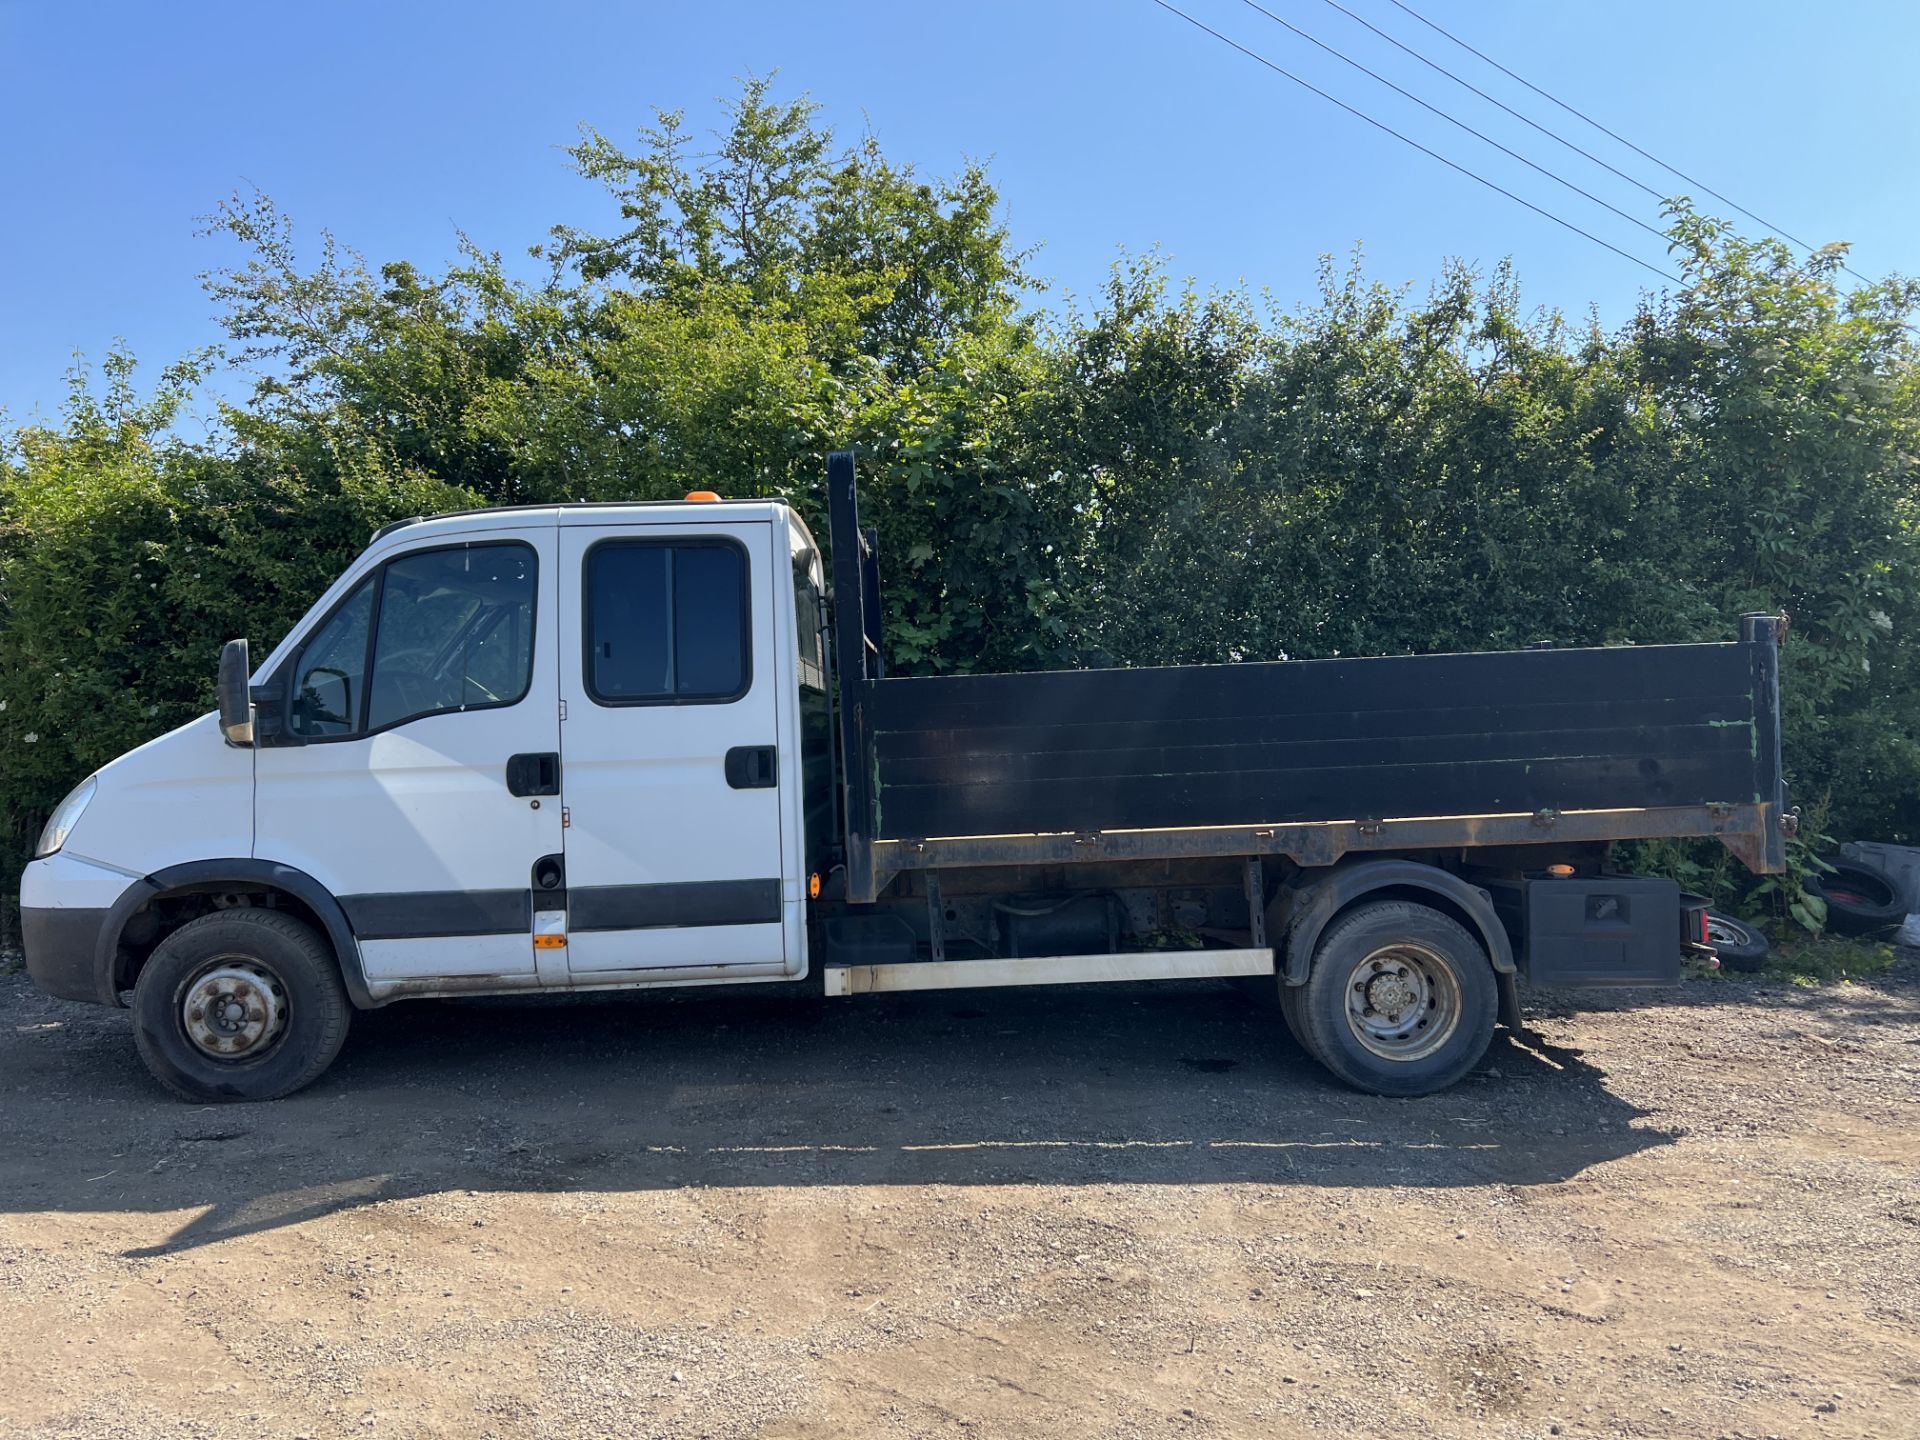 2011 IVECO DAILY 70C16 CREW CAB TIPPER *41K MILES* LOCATION NORTH YORKSHIRE - Image 9 of 10